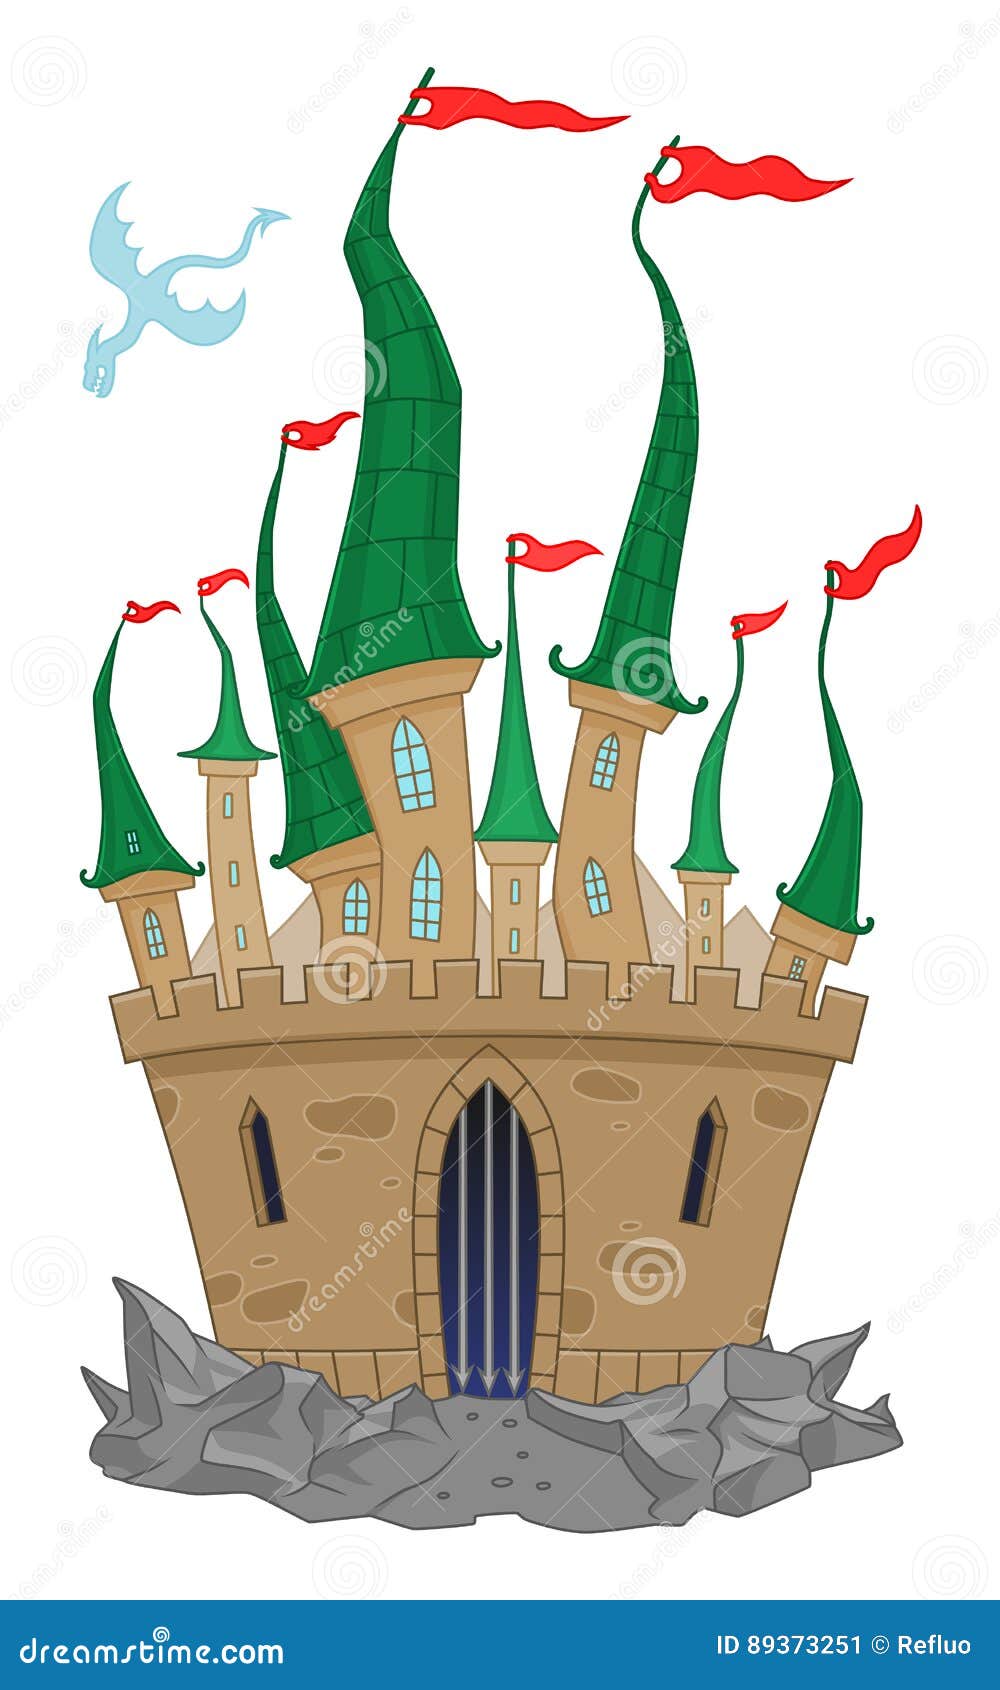 Funny castle stock vector. Illustration of isolated, palace - 89373251